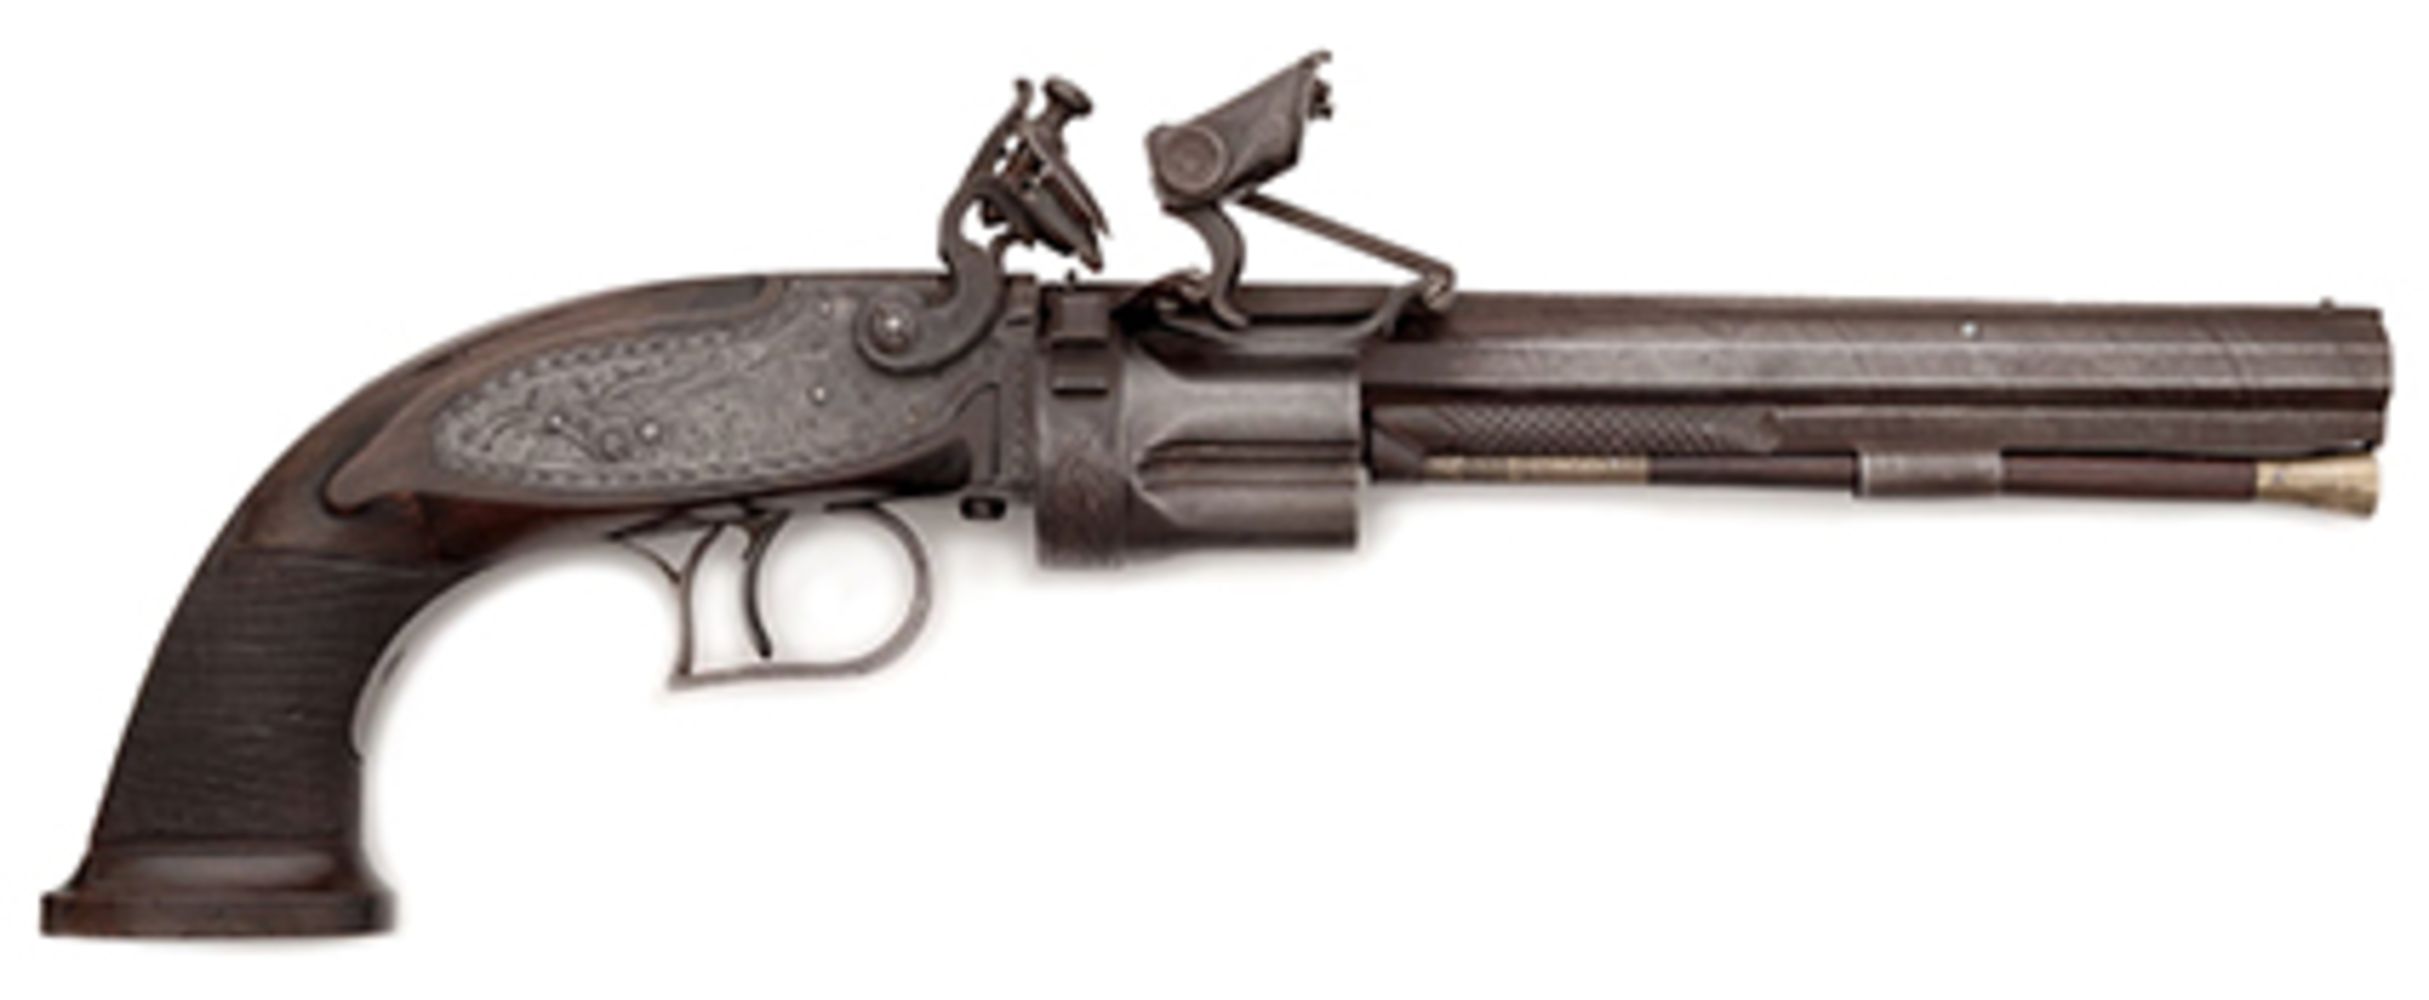 41th auction - Historical weapons, old technology and applied art